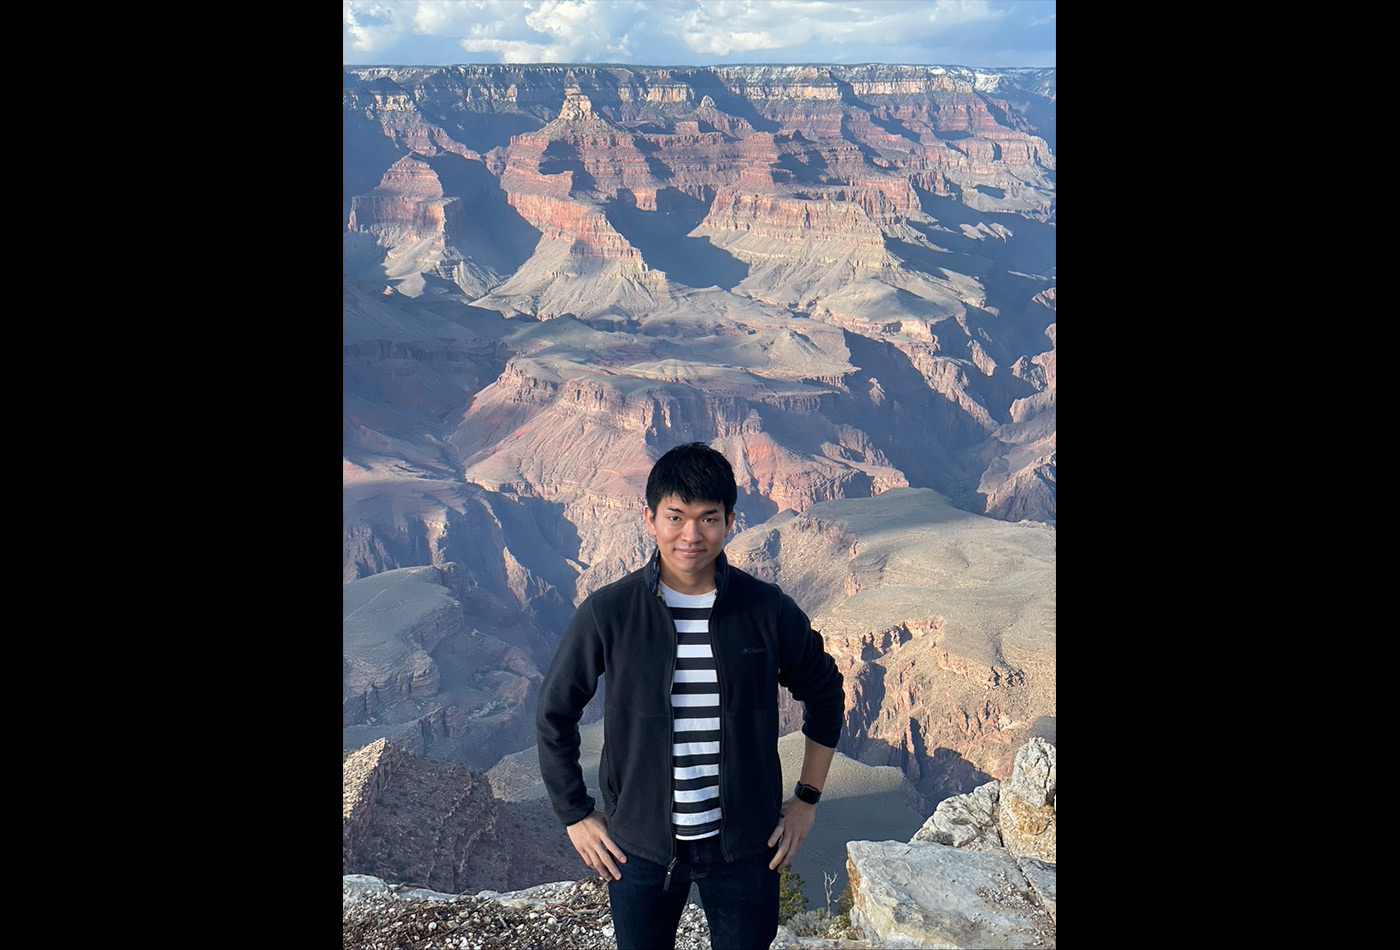 Ryotaro Okabe smiles in front of the Grand Canyon.